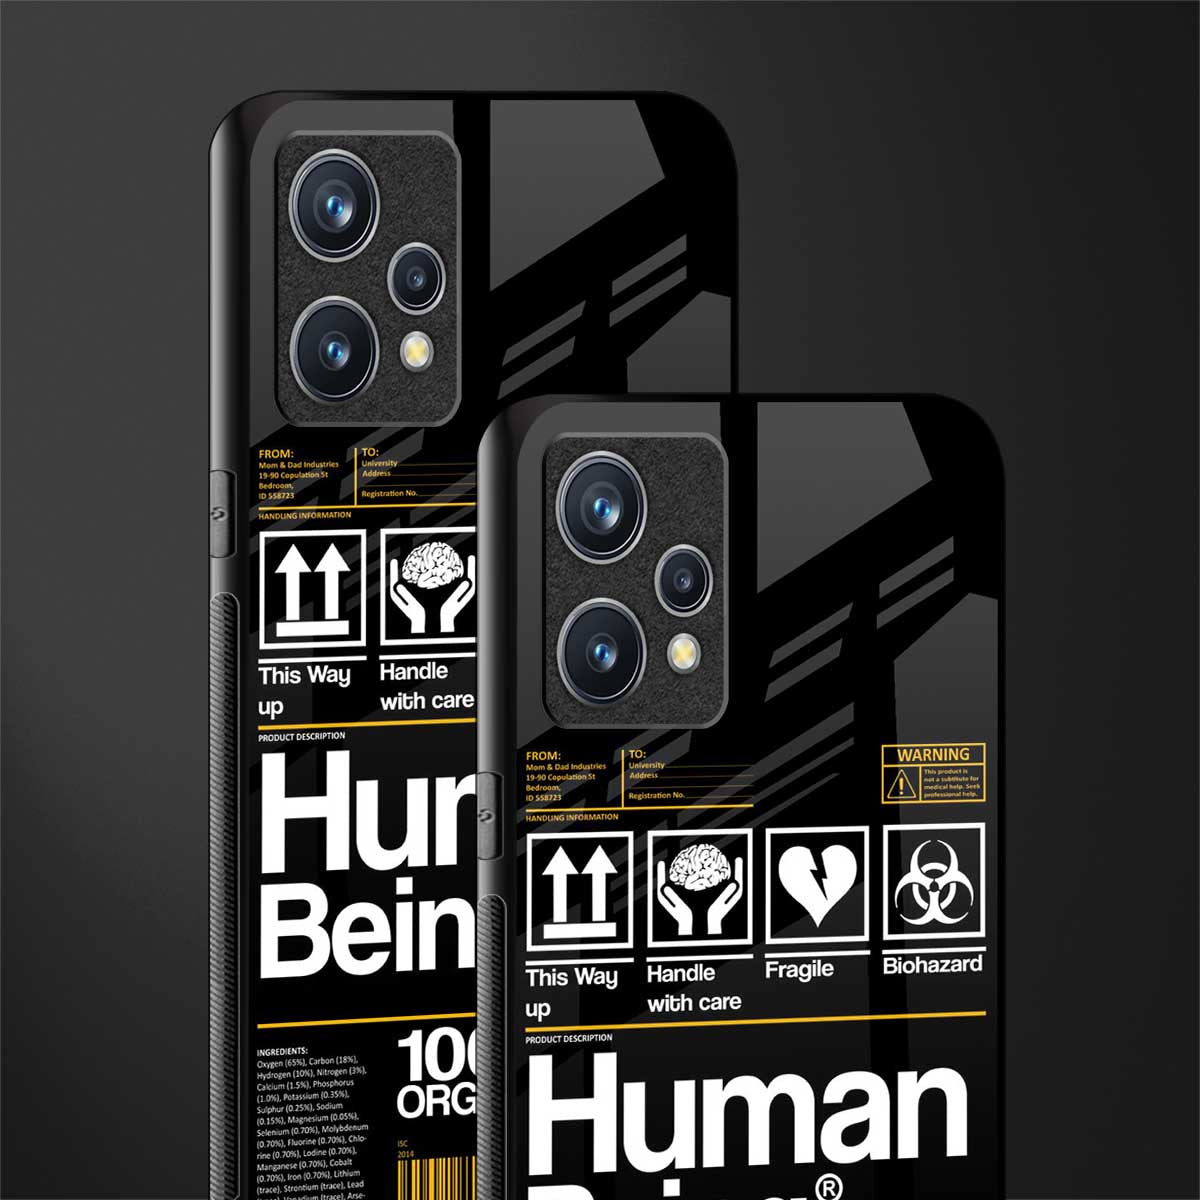 human being label phone cover for realme 9 pro plus 5g